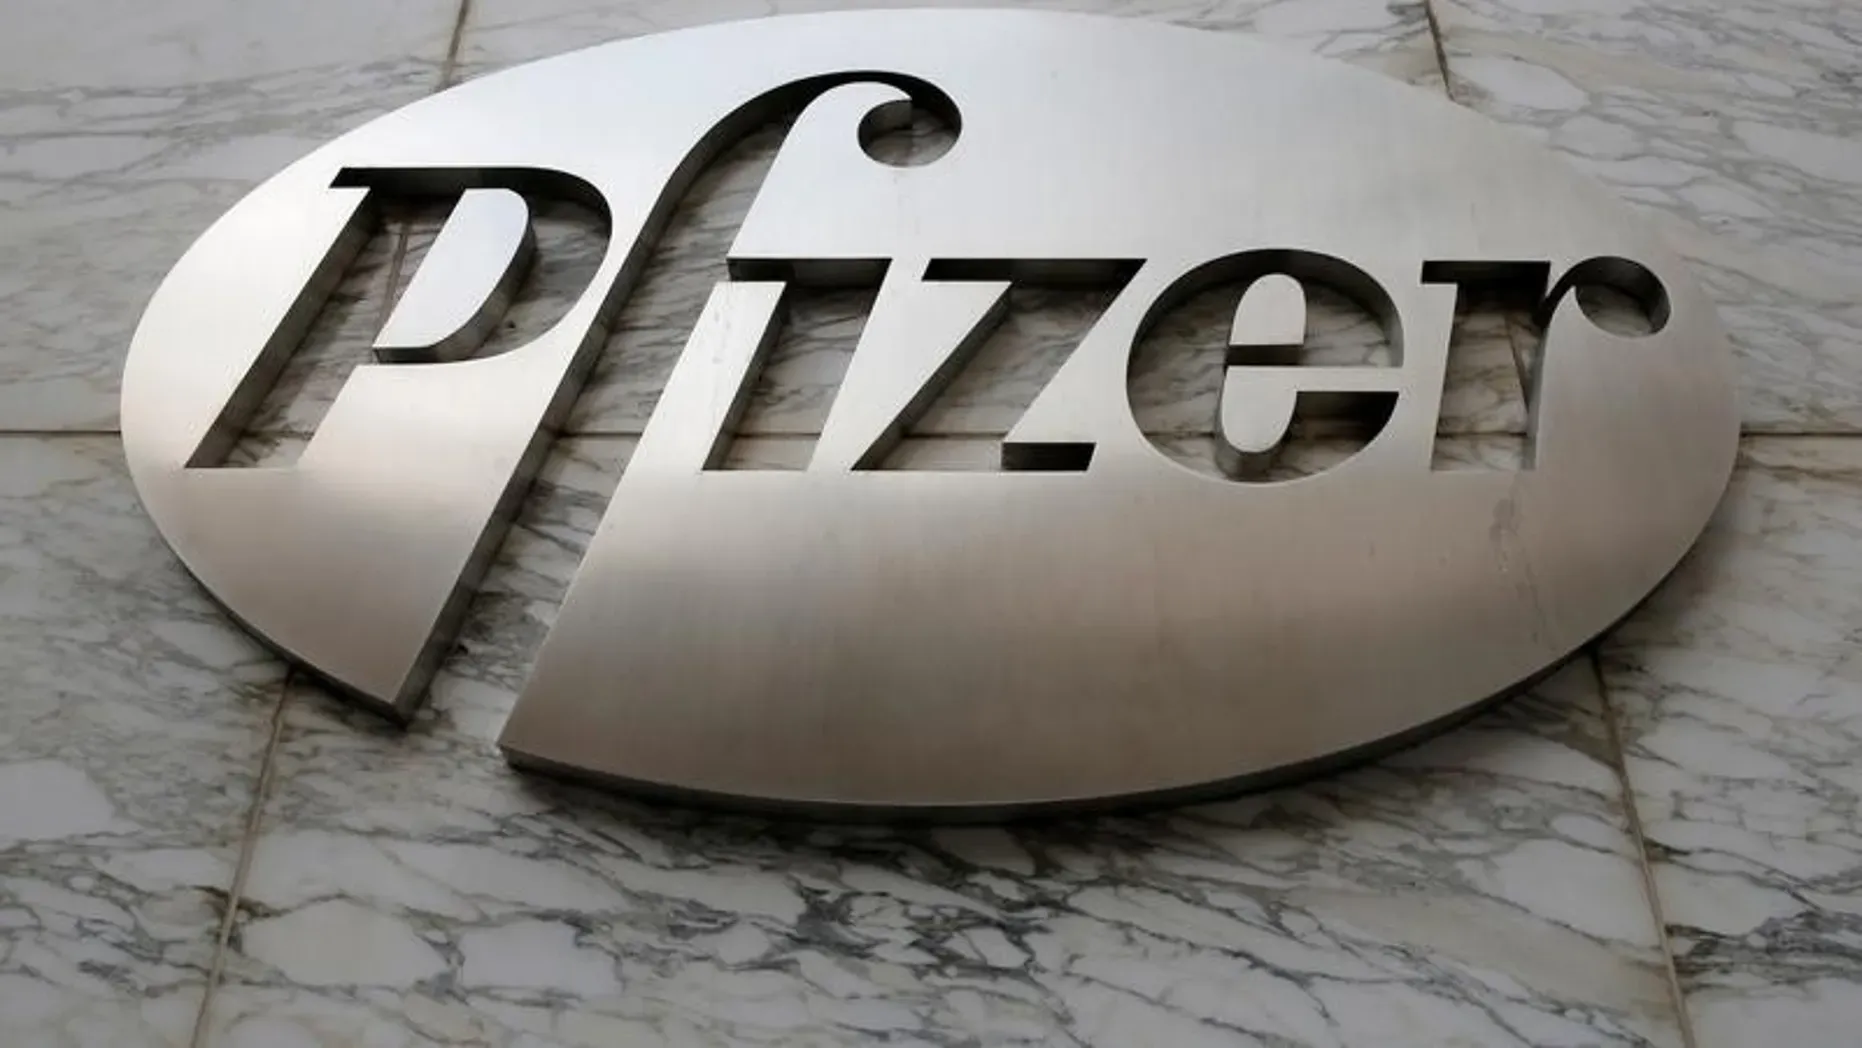 Pfizer Releases New Pill That Makes Stupid People Stop Buying Memecoins And NFTs